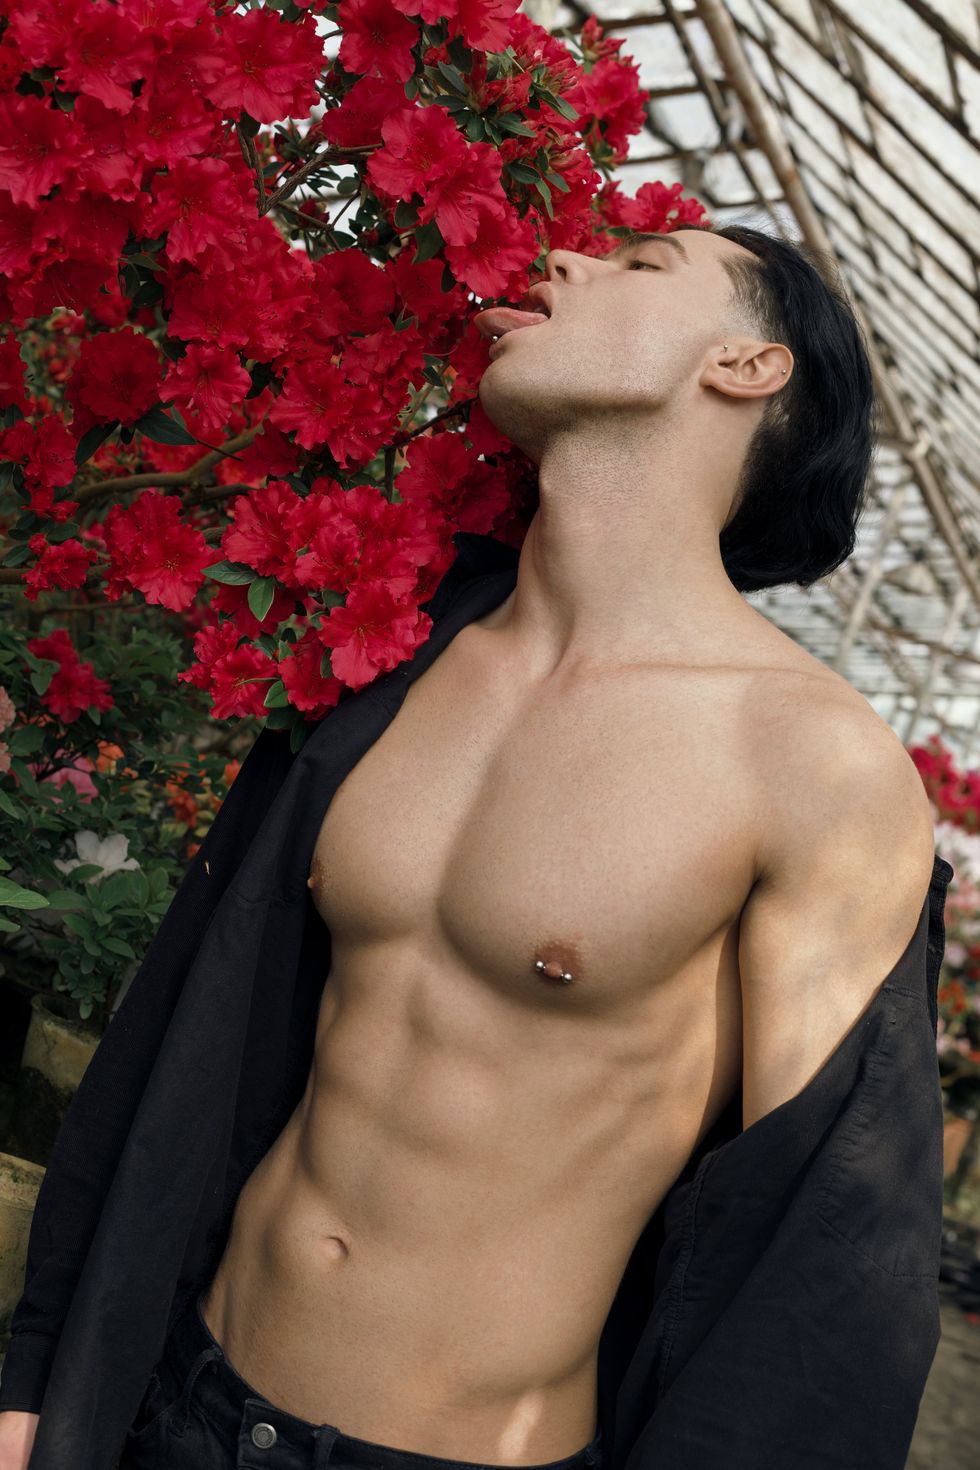 man with nipple ring licking flowers